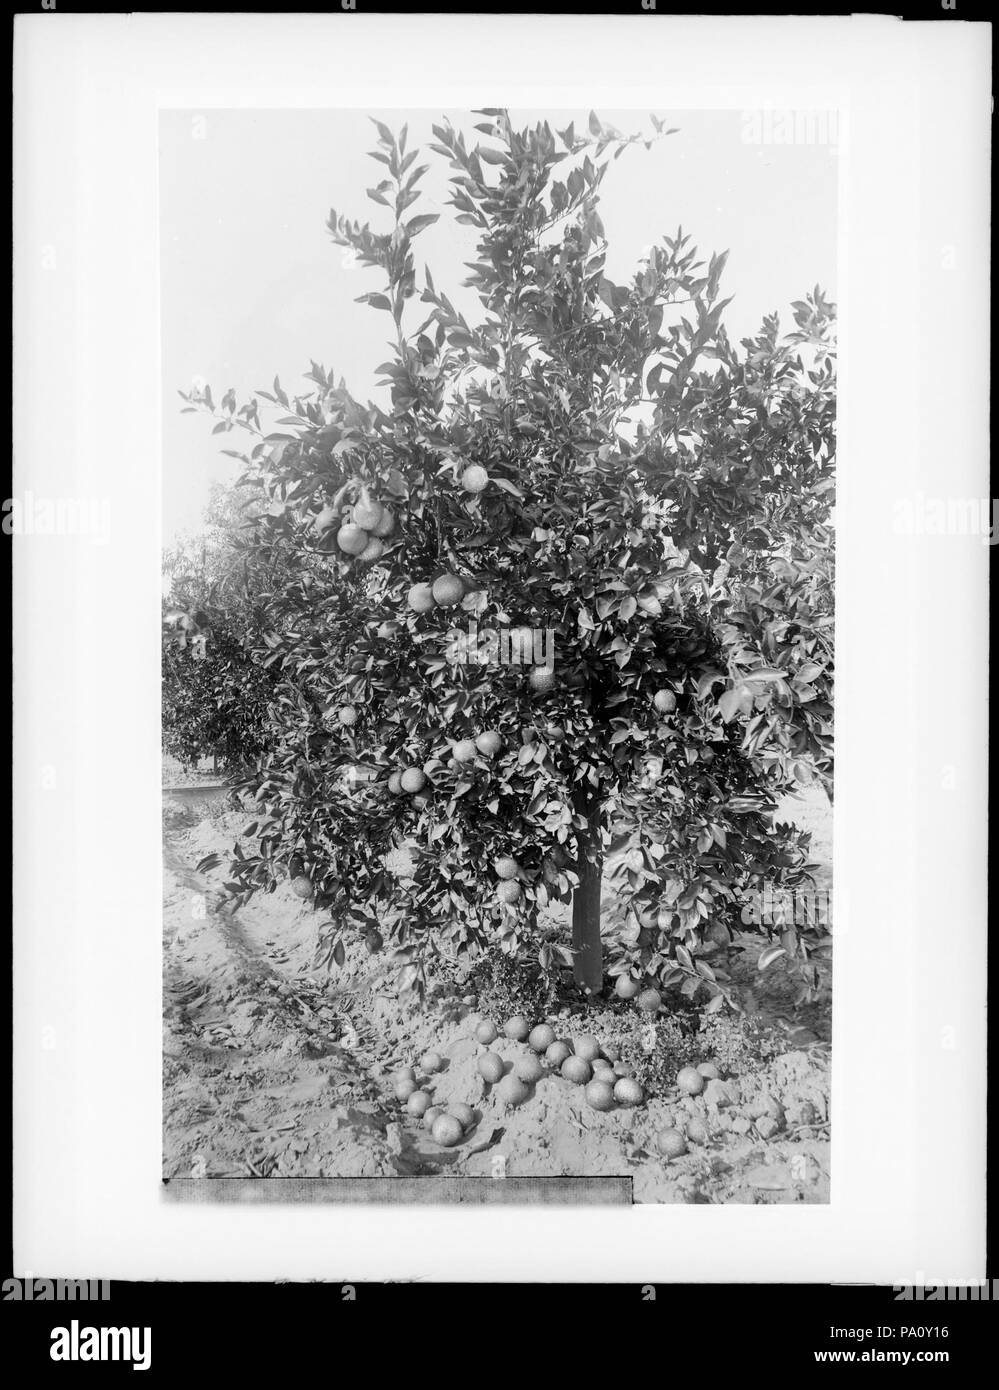 . English: Four-year old orange (lemon?) tree laden with oranges (lemons?) 'at H.S. Snow's', Riverside, California, ca.1910 Photograph of four-year old orange (lemon?) tree laden with oranges (lemons?) 'at H.S. Snow's', Riverside, California, ca.1910. Fruit is visible on the ground under the tree in some ruts as well.  Call number: CHS-172 Filename: CHS-172 Coverage date: circa 1910 Part of collection: California Historical Society Collection, 1860-1960 Format: glass plate negatives Type: images Geographic subject (city or populated place): Riverside Repository name: USC Libraries Special Coll Stock Photo